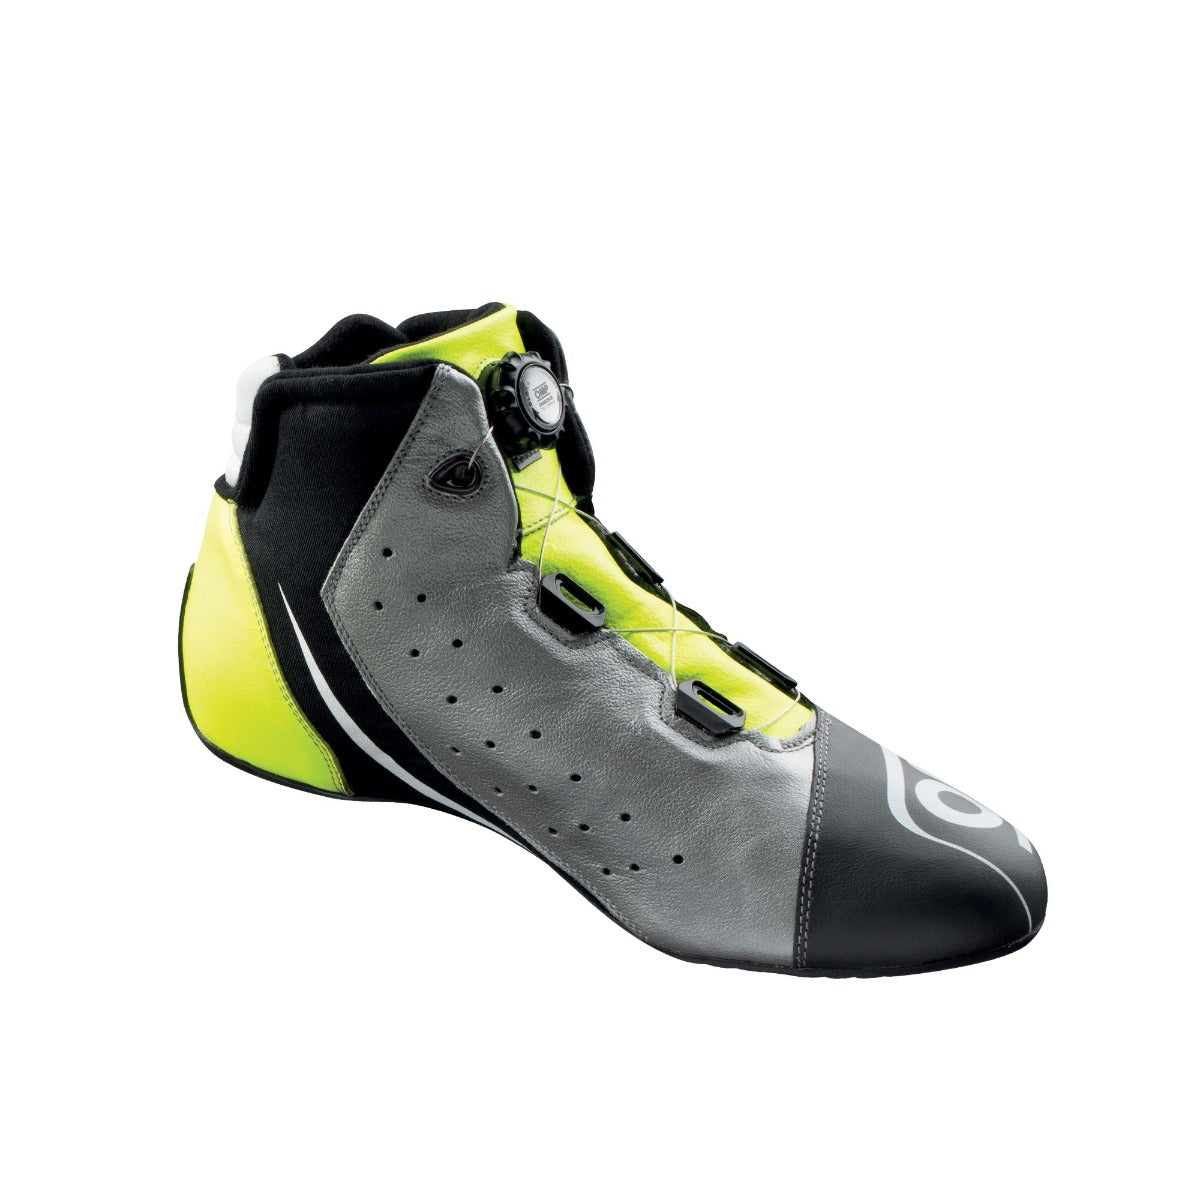 Image of OMP One Evo X R Nomex Race Shoe in black, yellow and silver